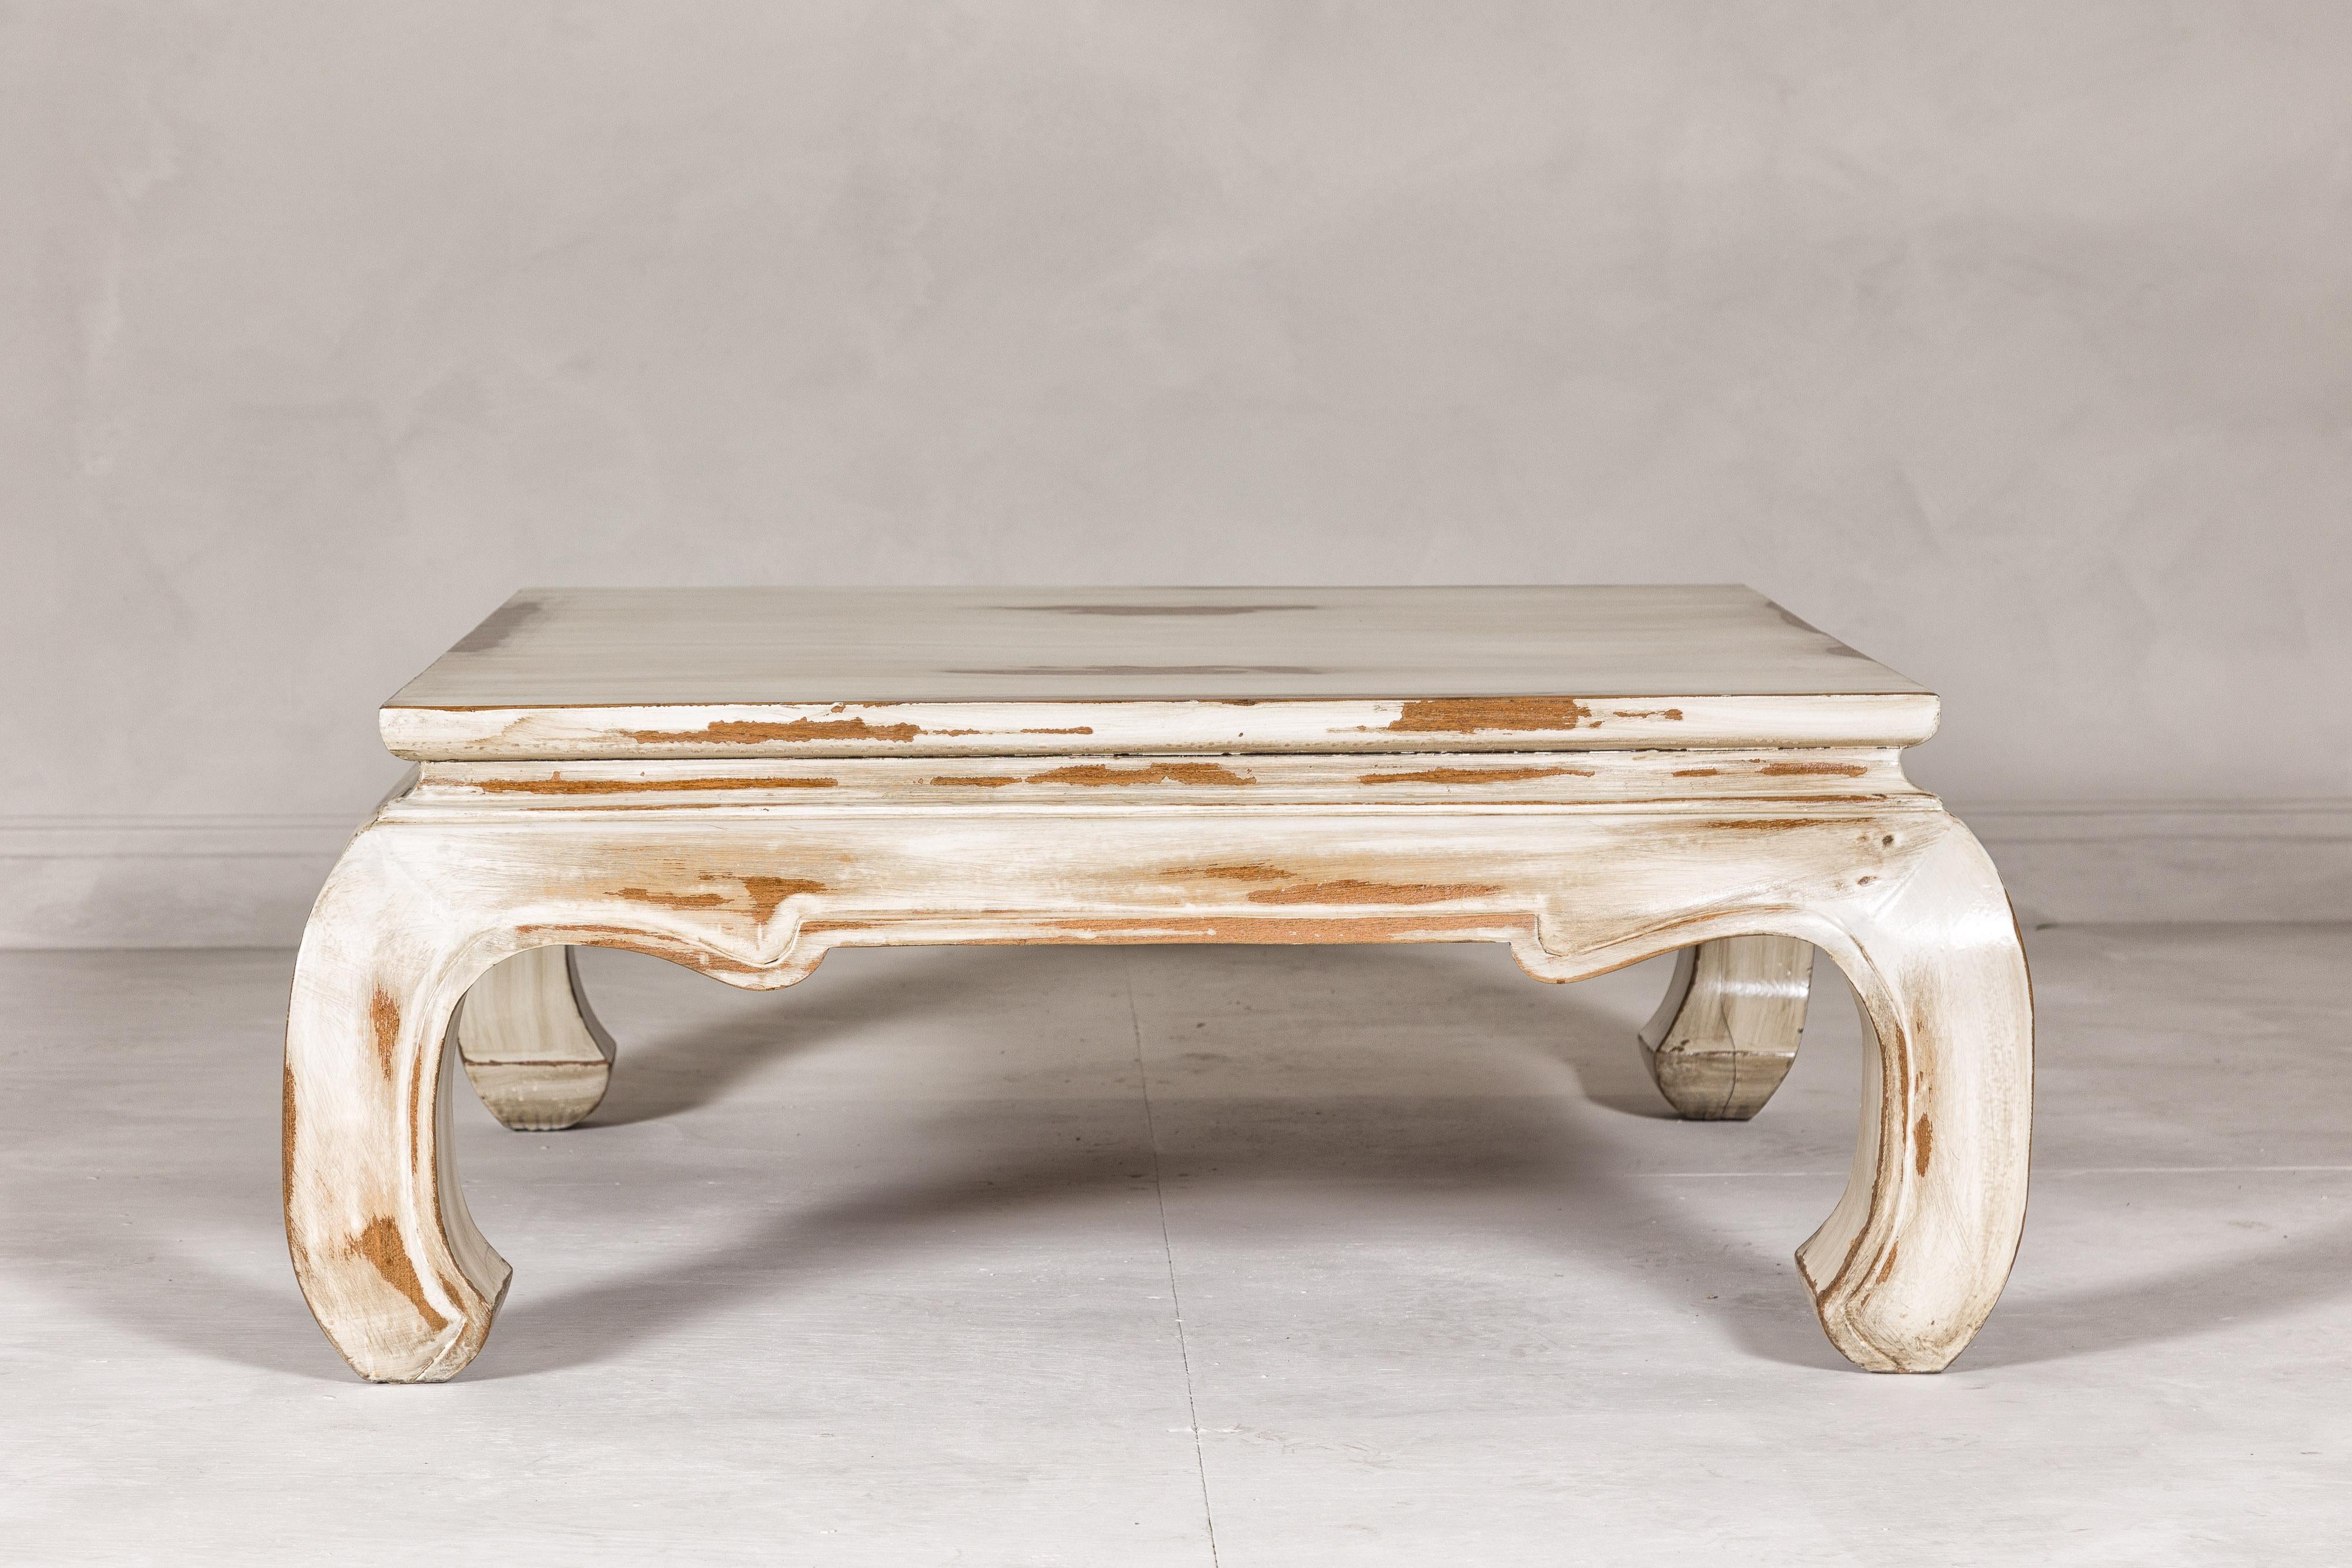 Asian Distressed White Coffee Table with Chow Legs and Square Top, Vintage